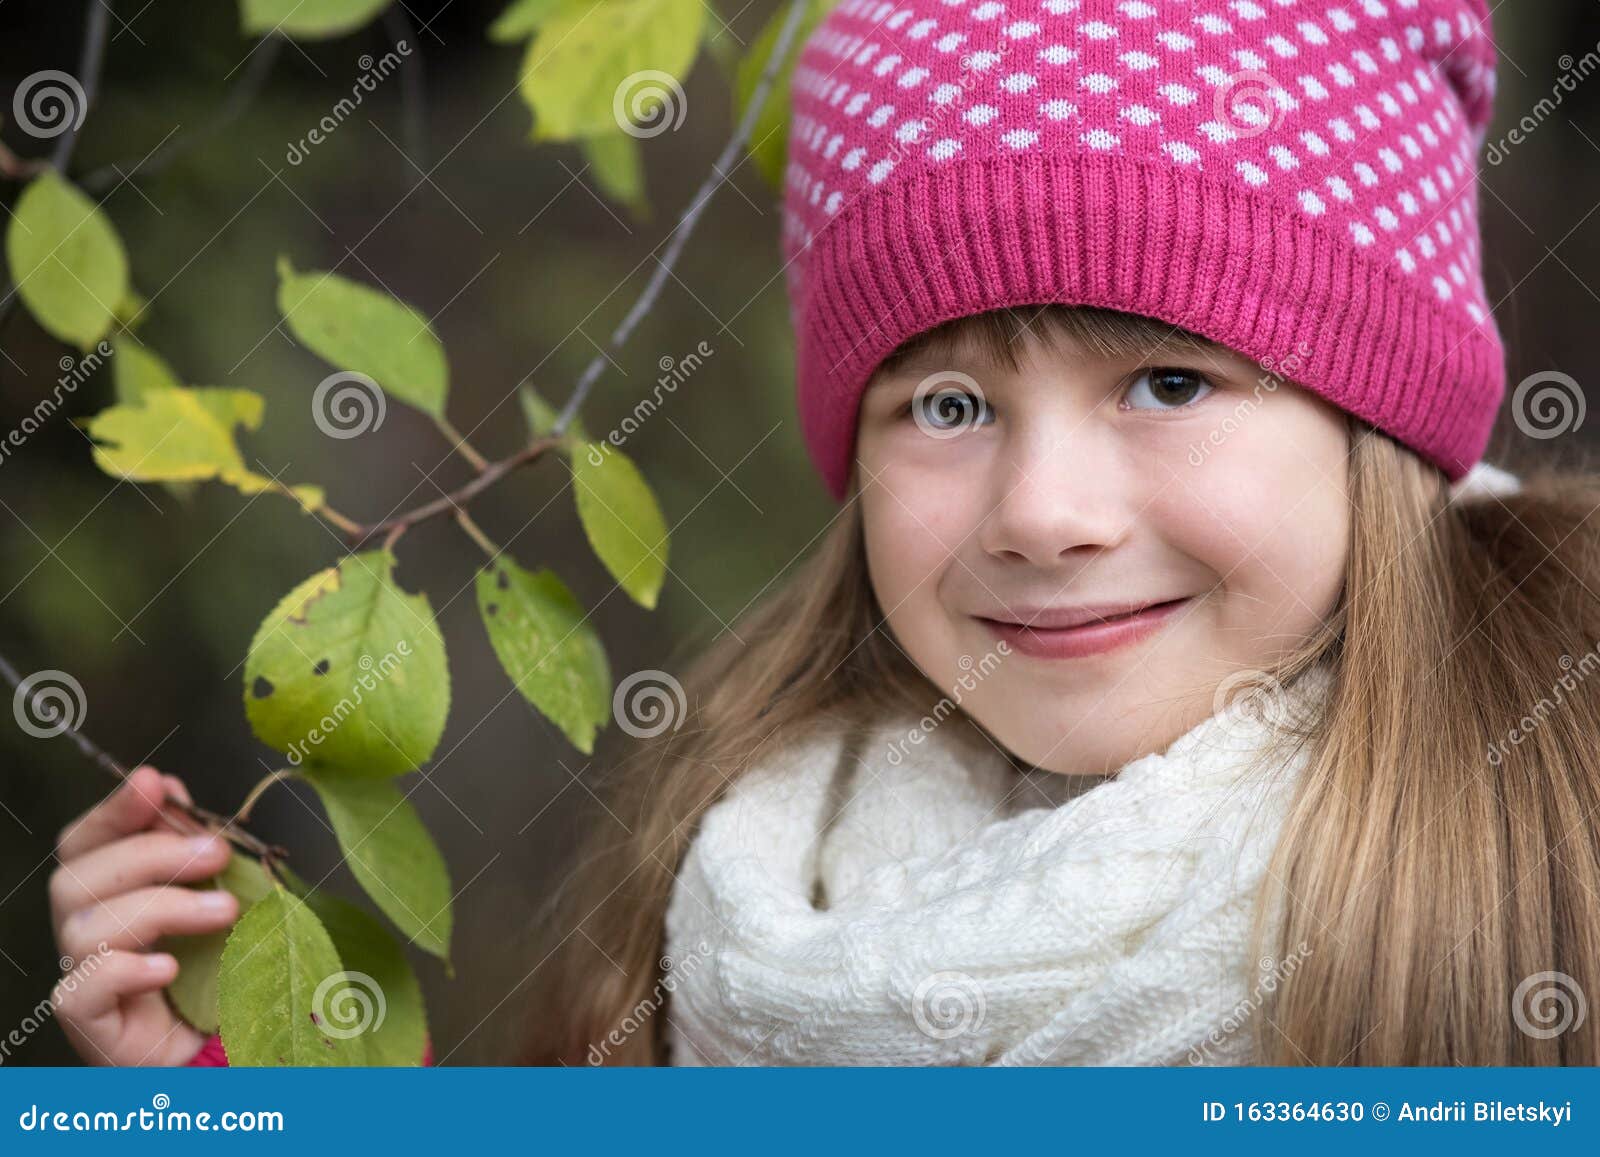 Pretty Child Girl Wearing Warm Winter Clothes Holding Tree Branch with ...